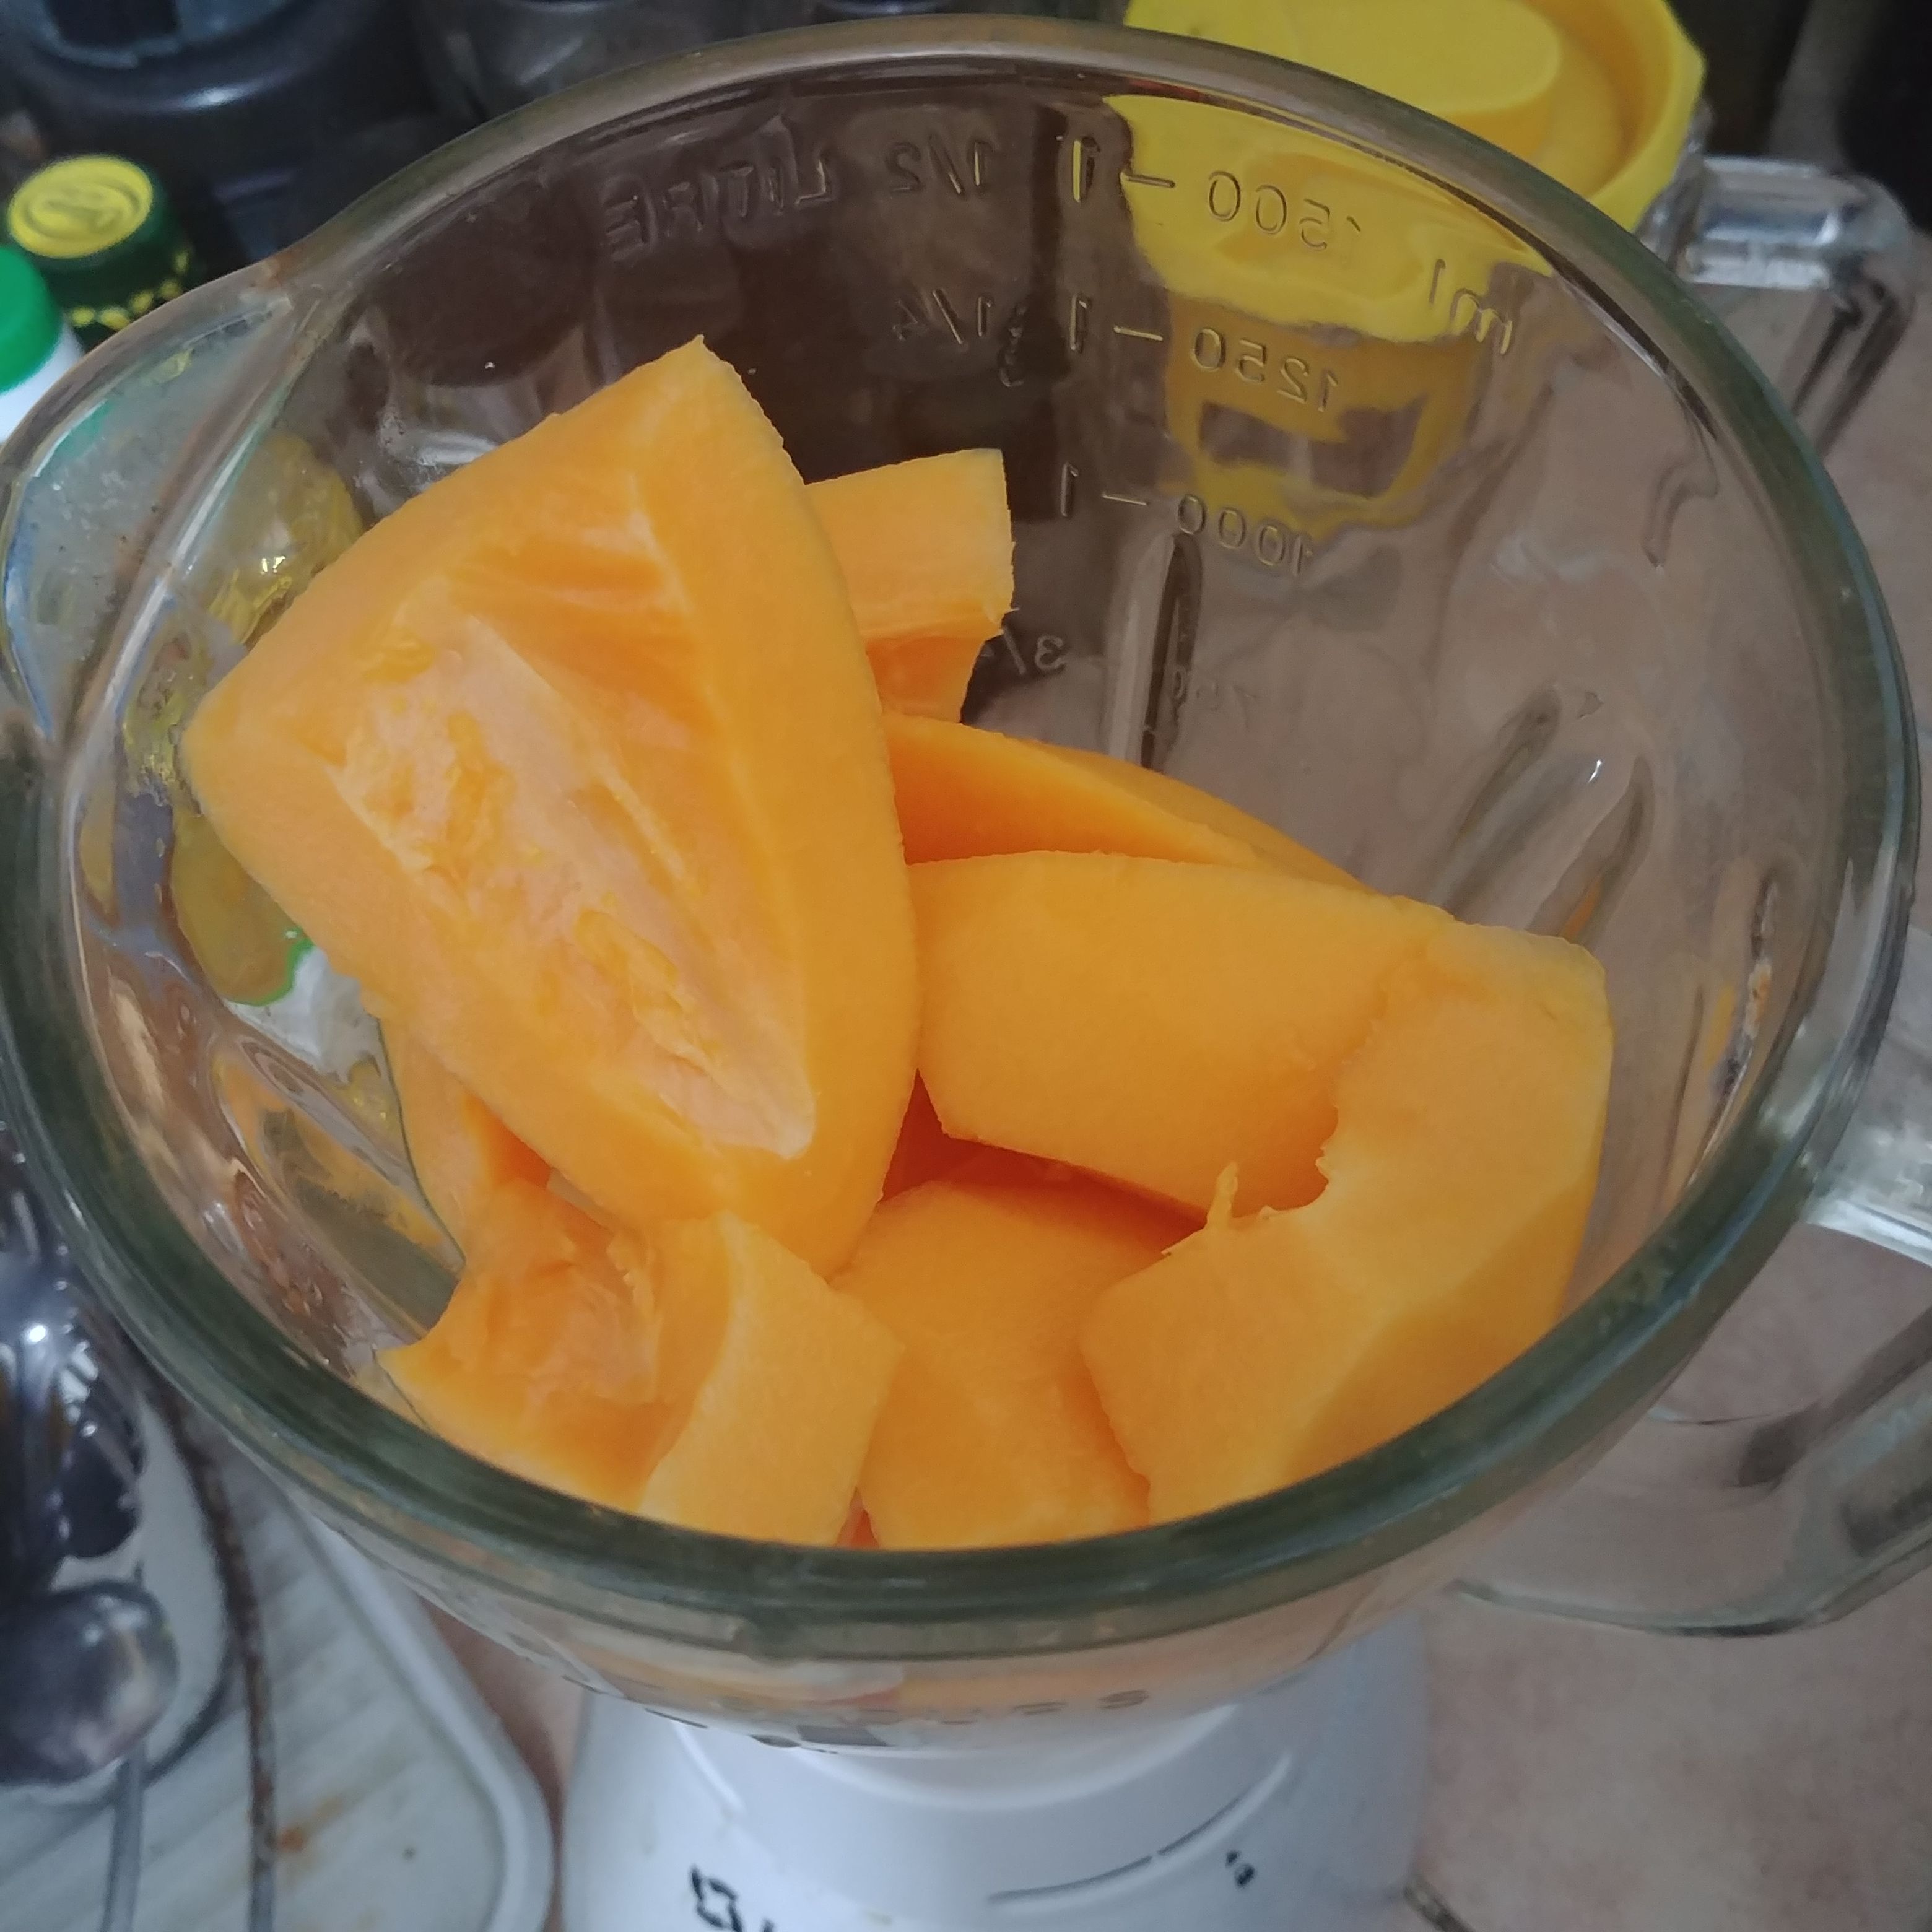 A very common papaya in the blender